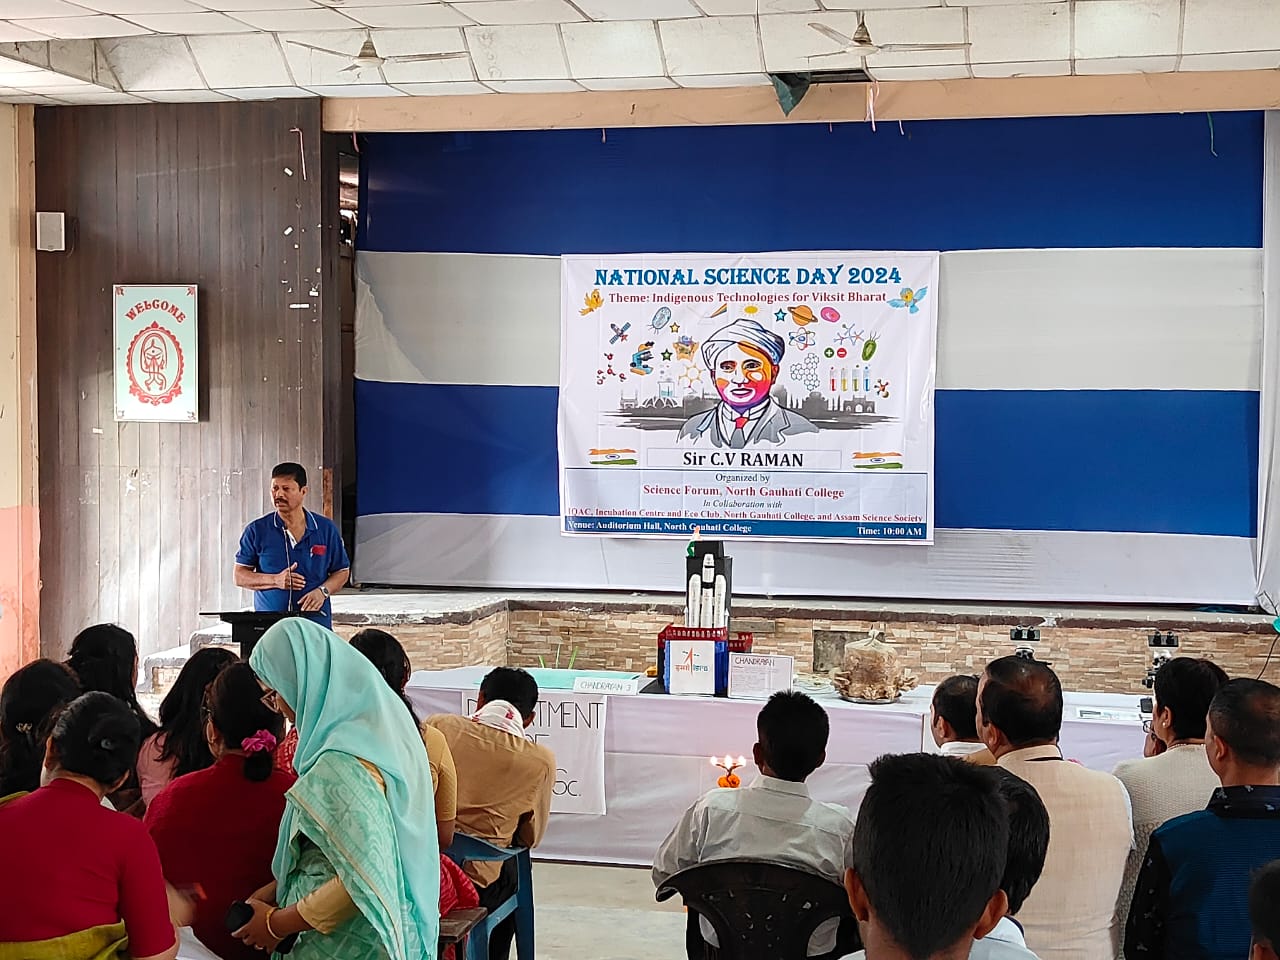 National Science Day 2024 organized by Science Forum, North Gauhati College in collboration with IQAC, Incubation Centre and Eco Club, North Gauhati College, and Assam Science Society on 28.02.2024